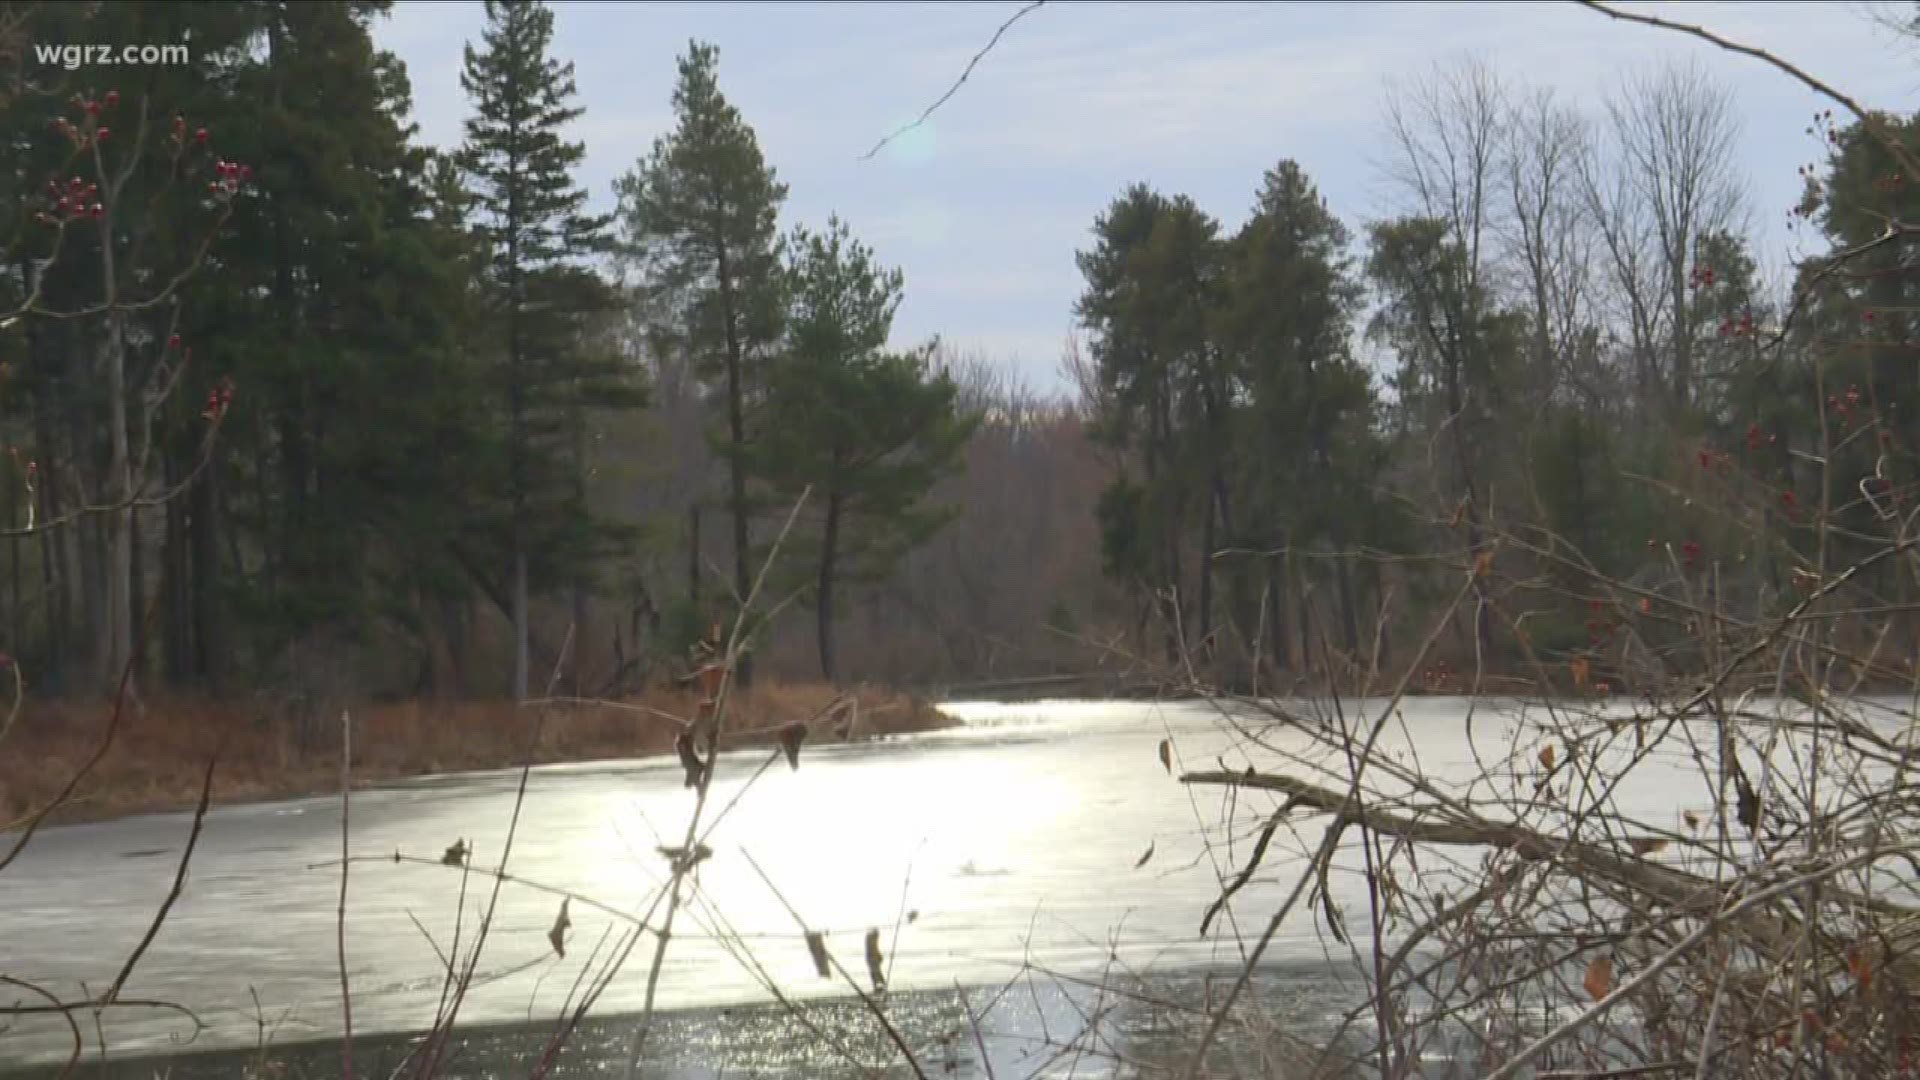 Channel 2's Terry Belke visited Reinstein Woods in Cheektowaga to take a look at some of the natural wonders hidden in the middle of a suburban neighborhood.